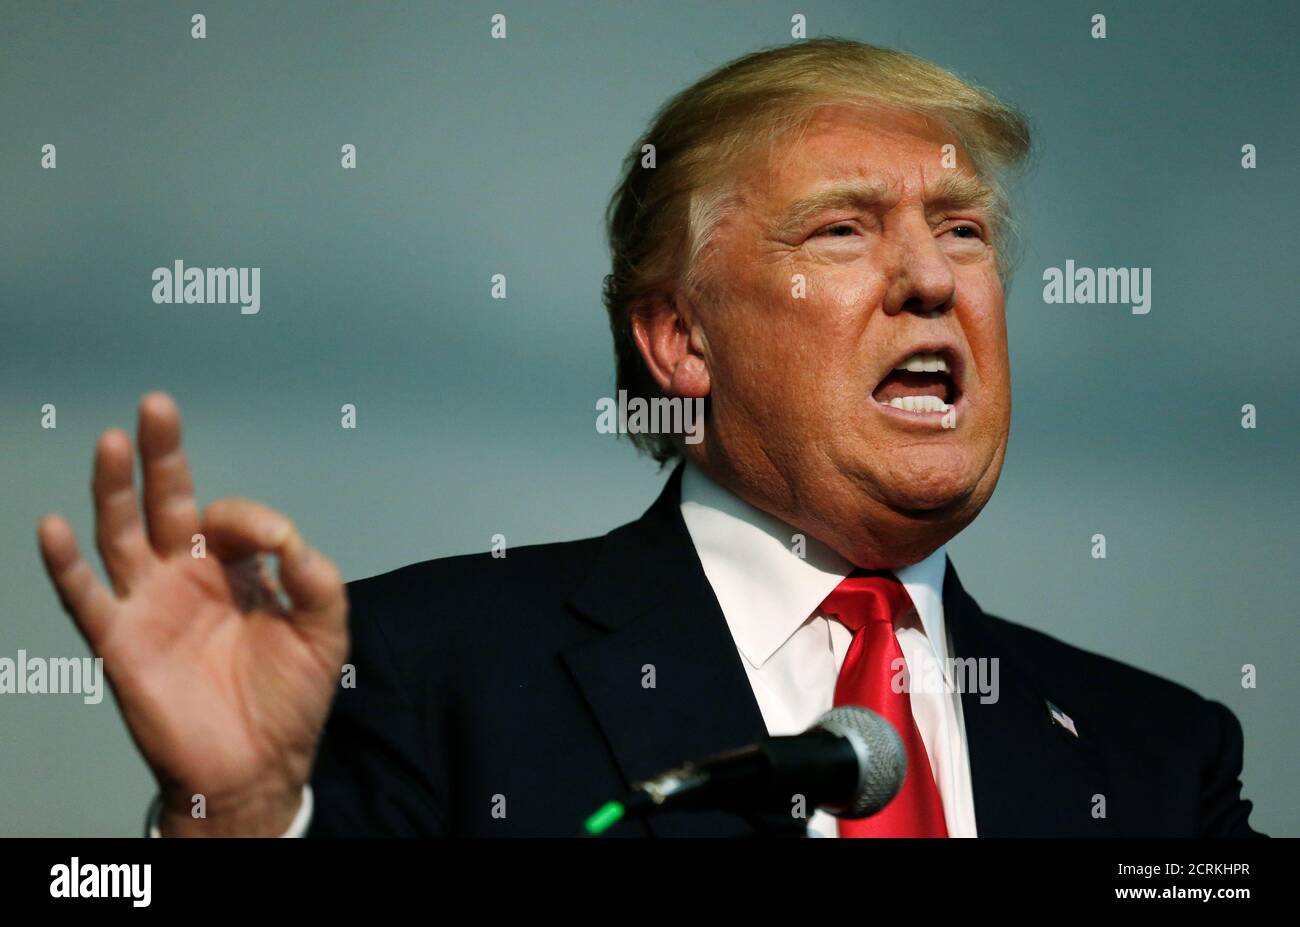 Republican Presidential candidate Donald Trump speaks during the Iowa caucuses at the Seven Flags Event Center in Clive, Iowa February 1, 2016. REUTERS/Jim Bourg Stock Photo